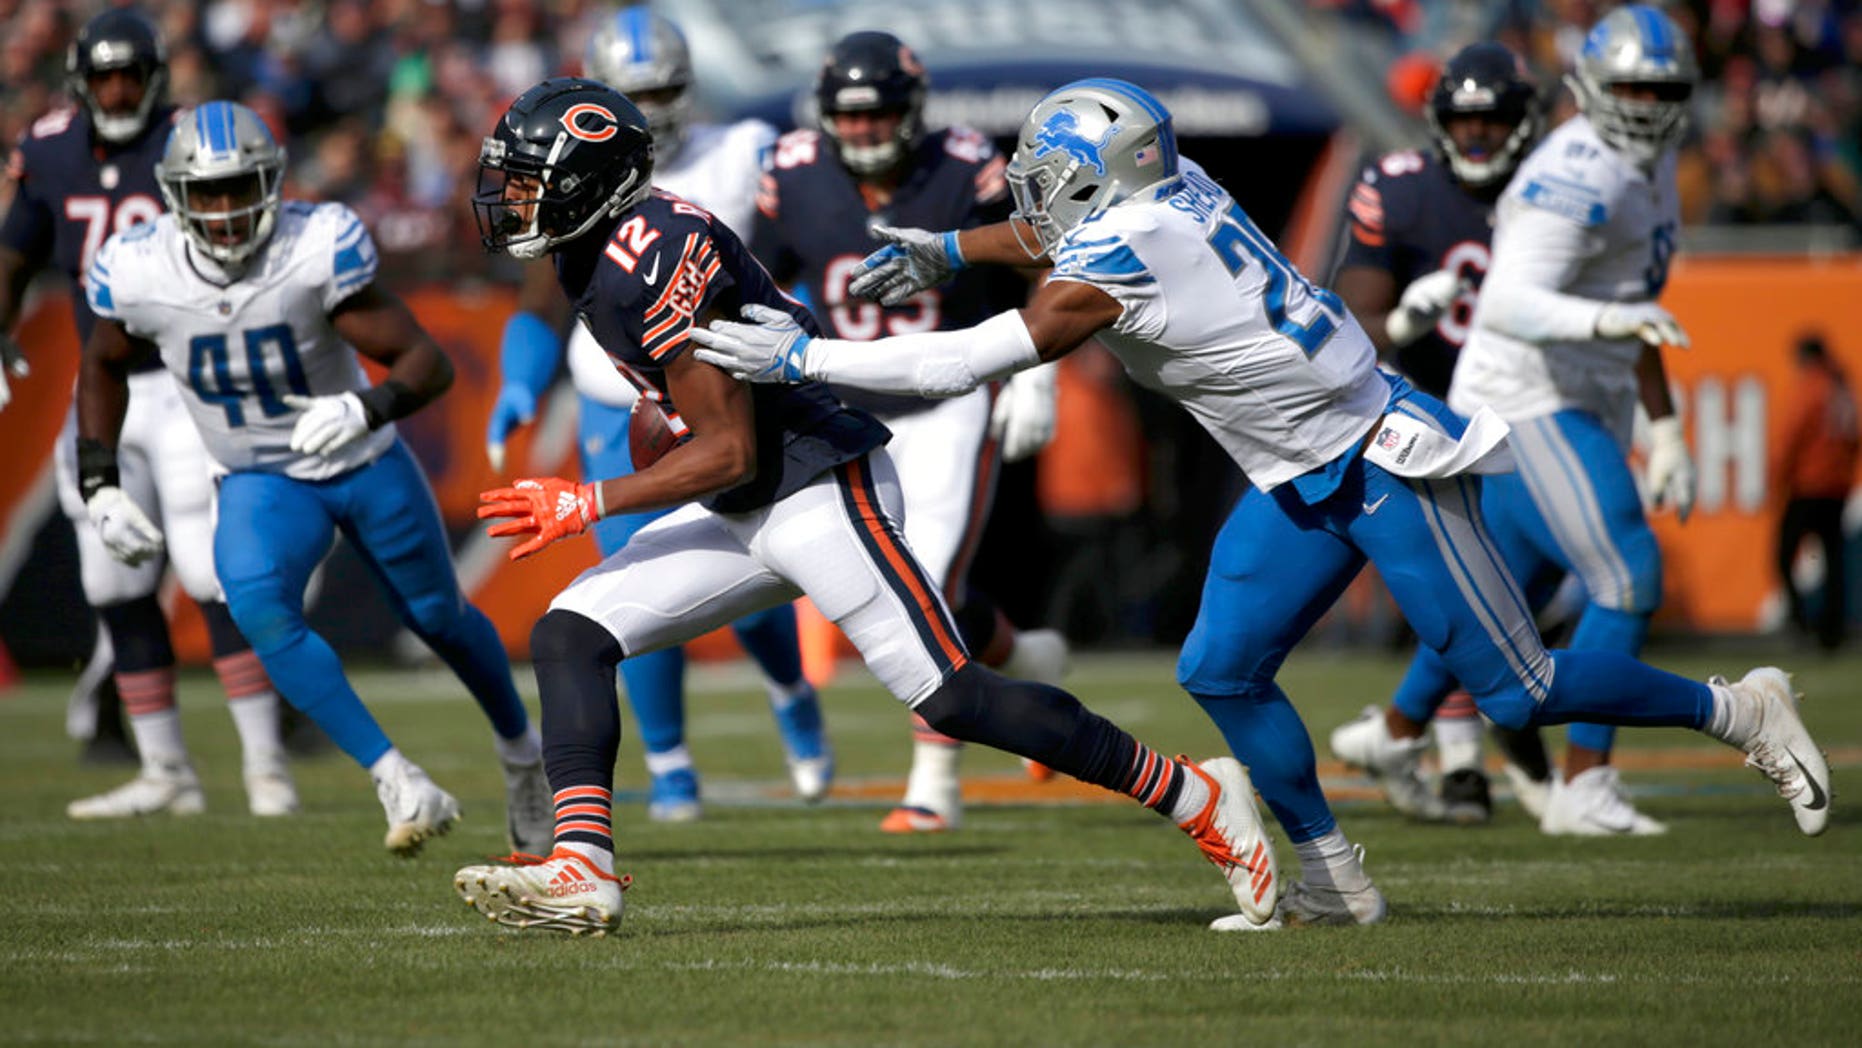 Bears kicker Cody Parkey hits upright four times in game against Lions